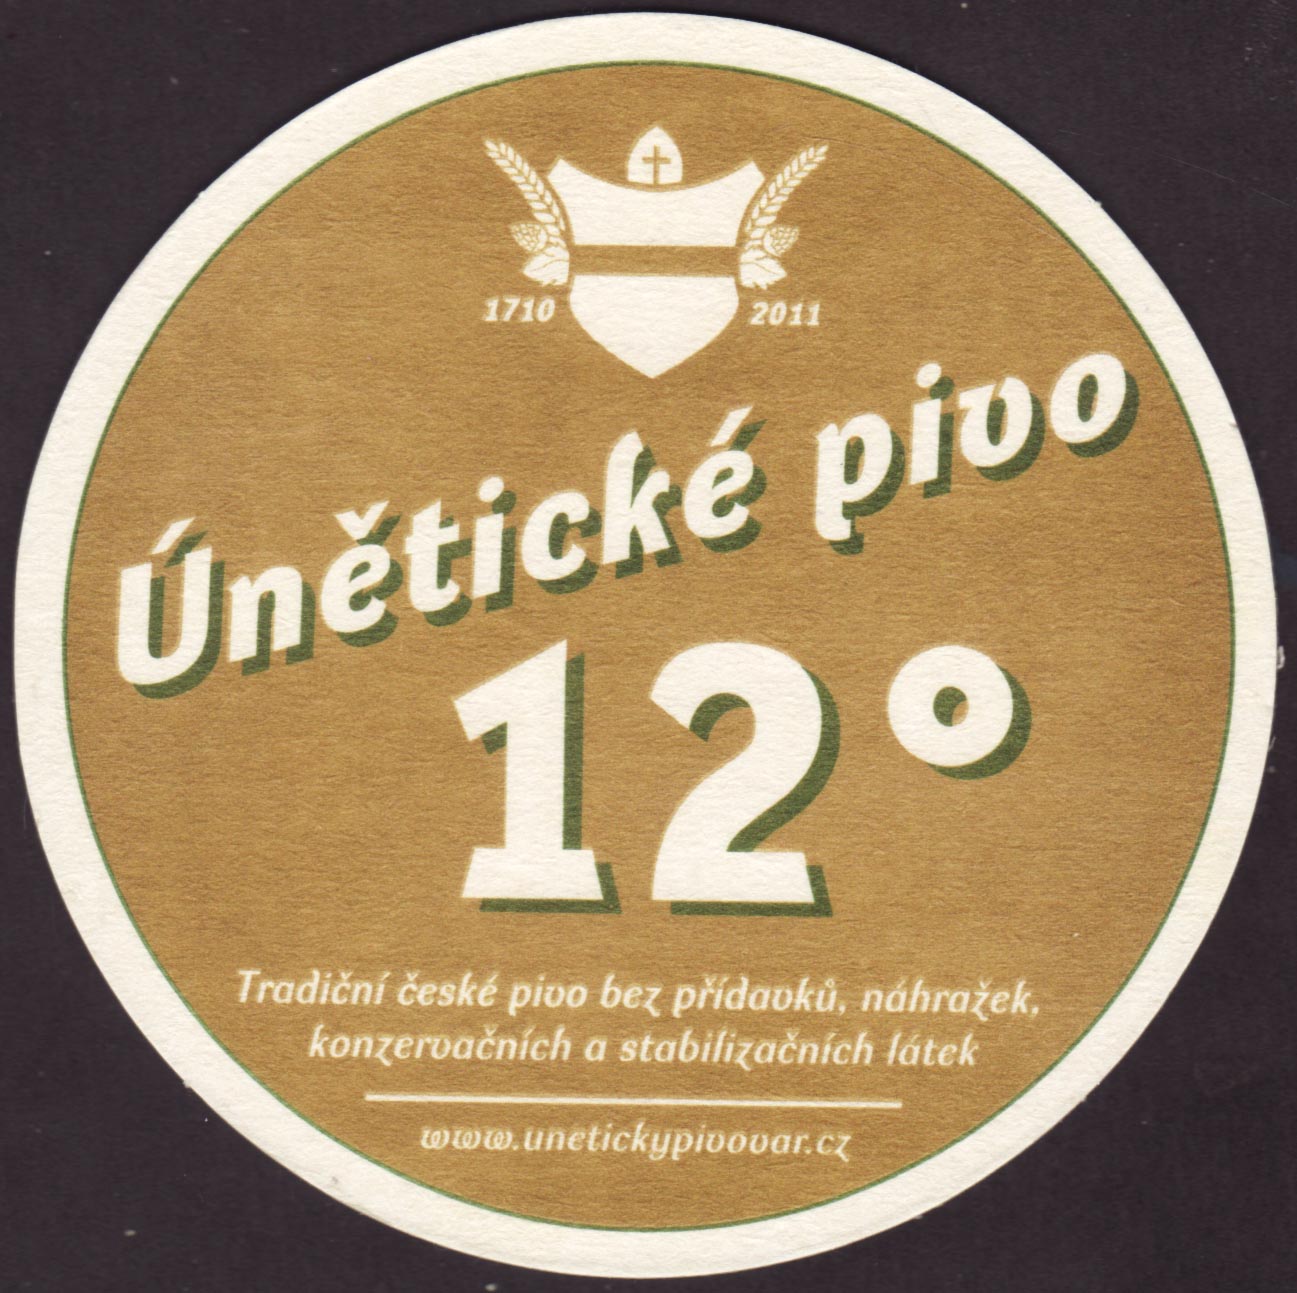 beer-coaster-coaster-number-14-2-brewery-uneticky-city-unetice-czech-republic